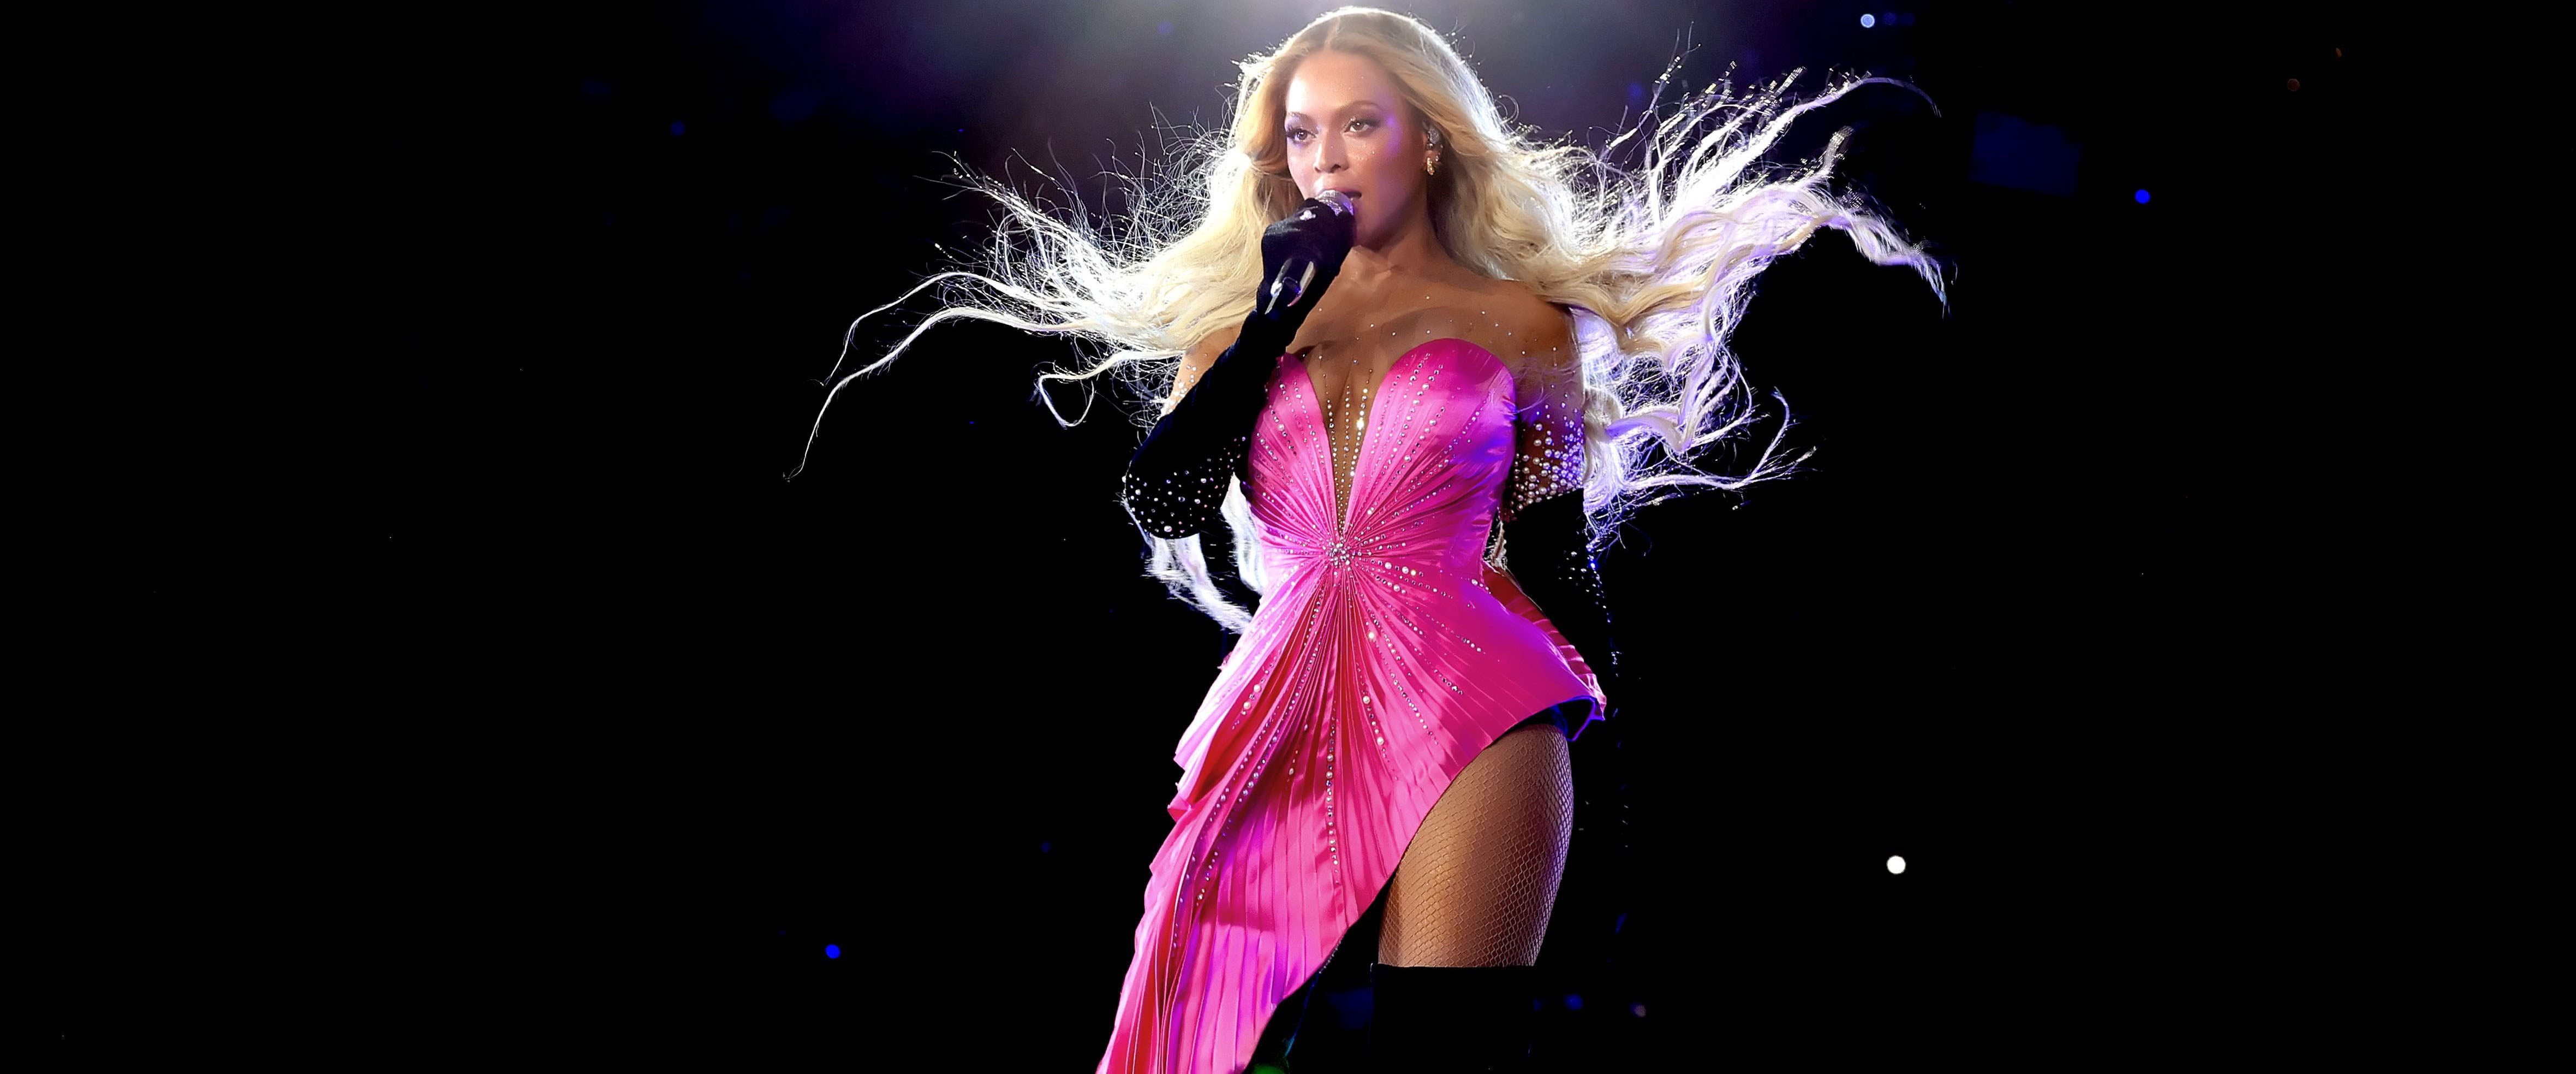 Beyonce's 42nd birthday concert: All the celebrities who attended